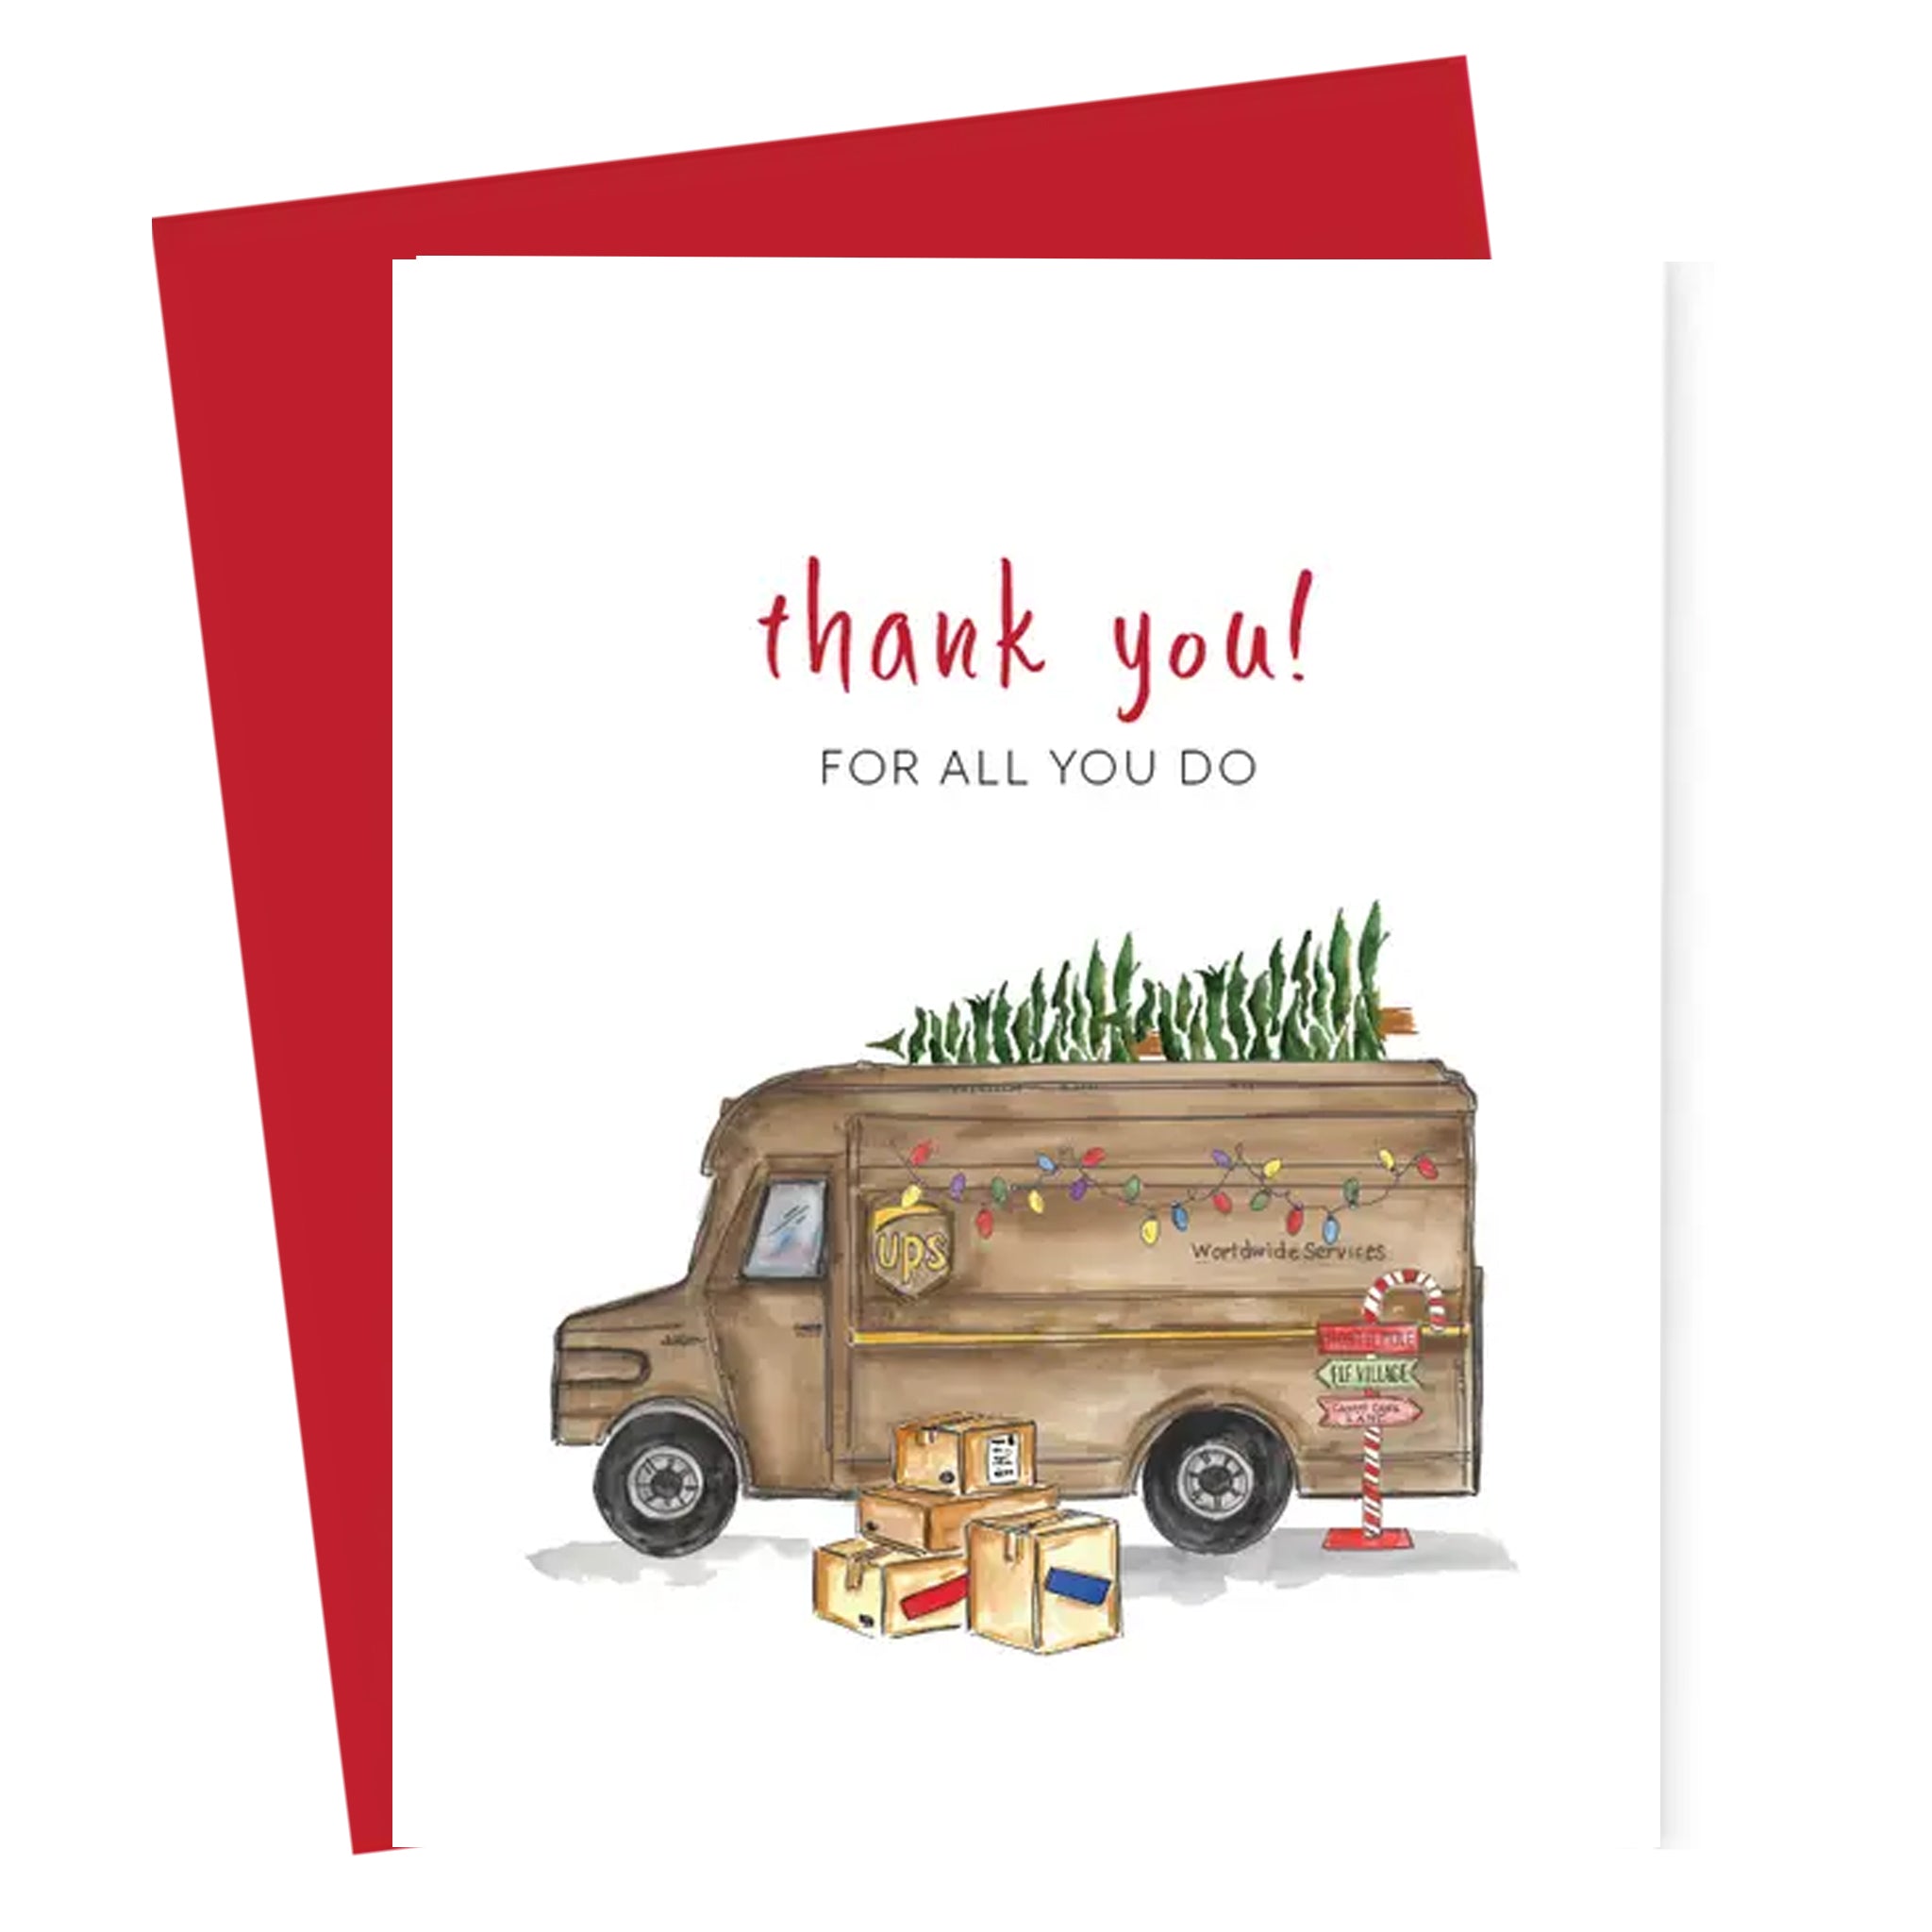 UPS Delivery Driver Appreciation Greeting Card – The Maryland Store